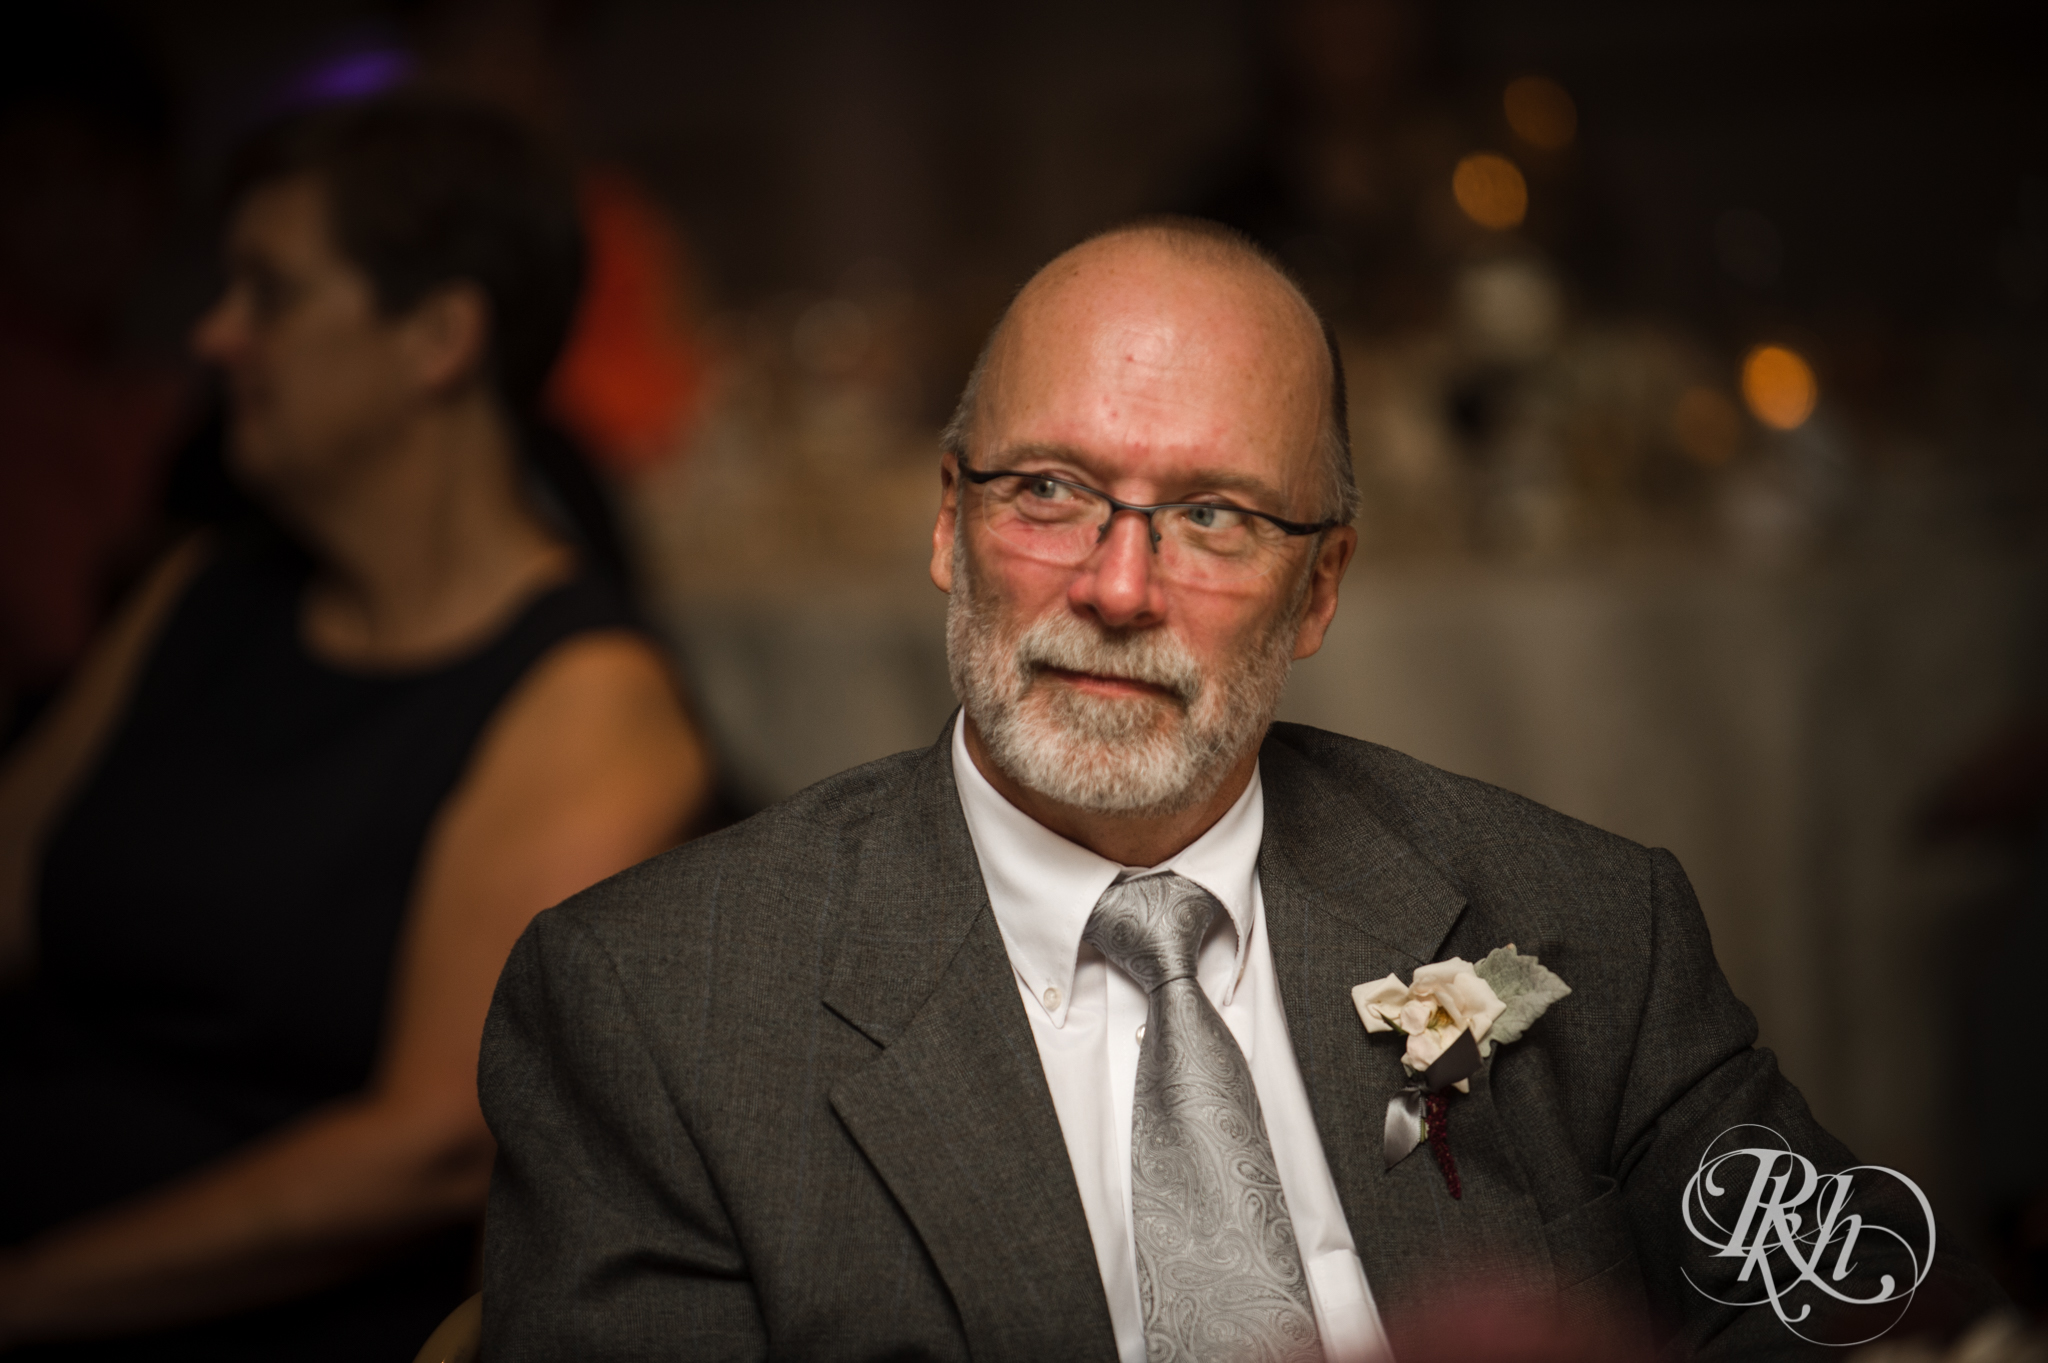 Father of groom smiles during wedding reception at the Saint Paul Hotel in Saint Paul, Minnesota.